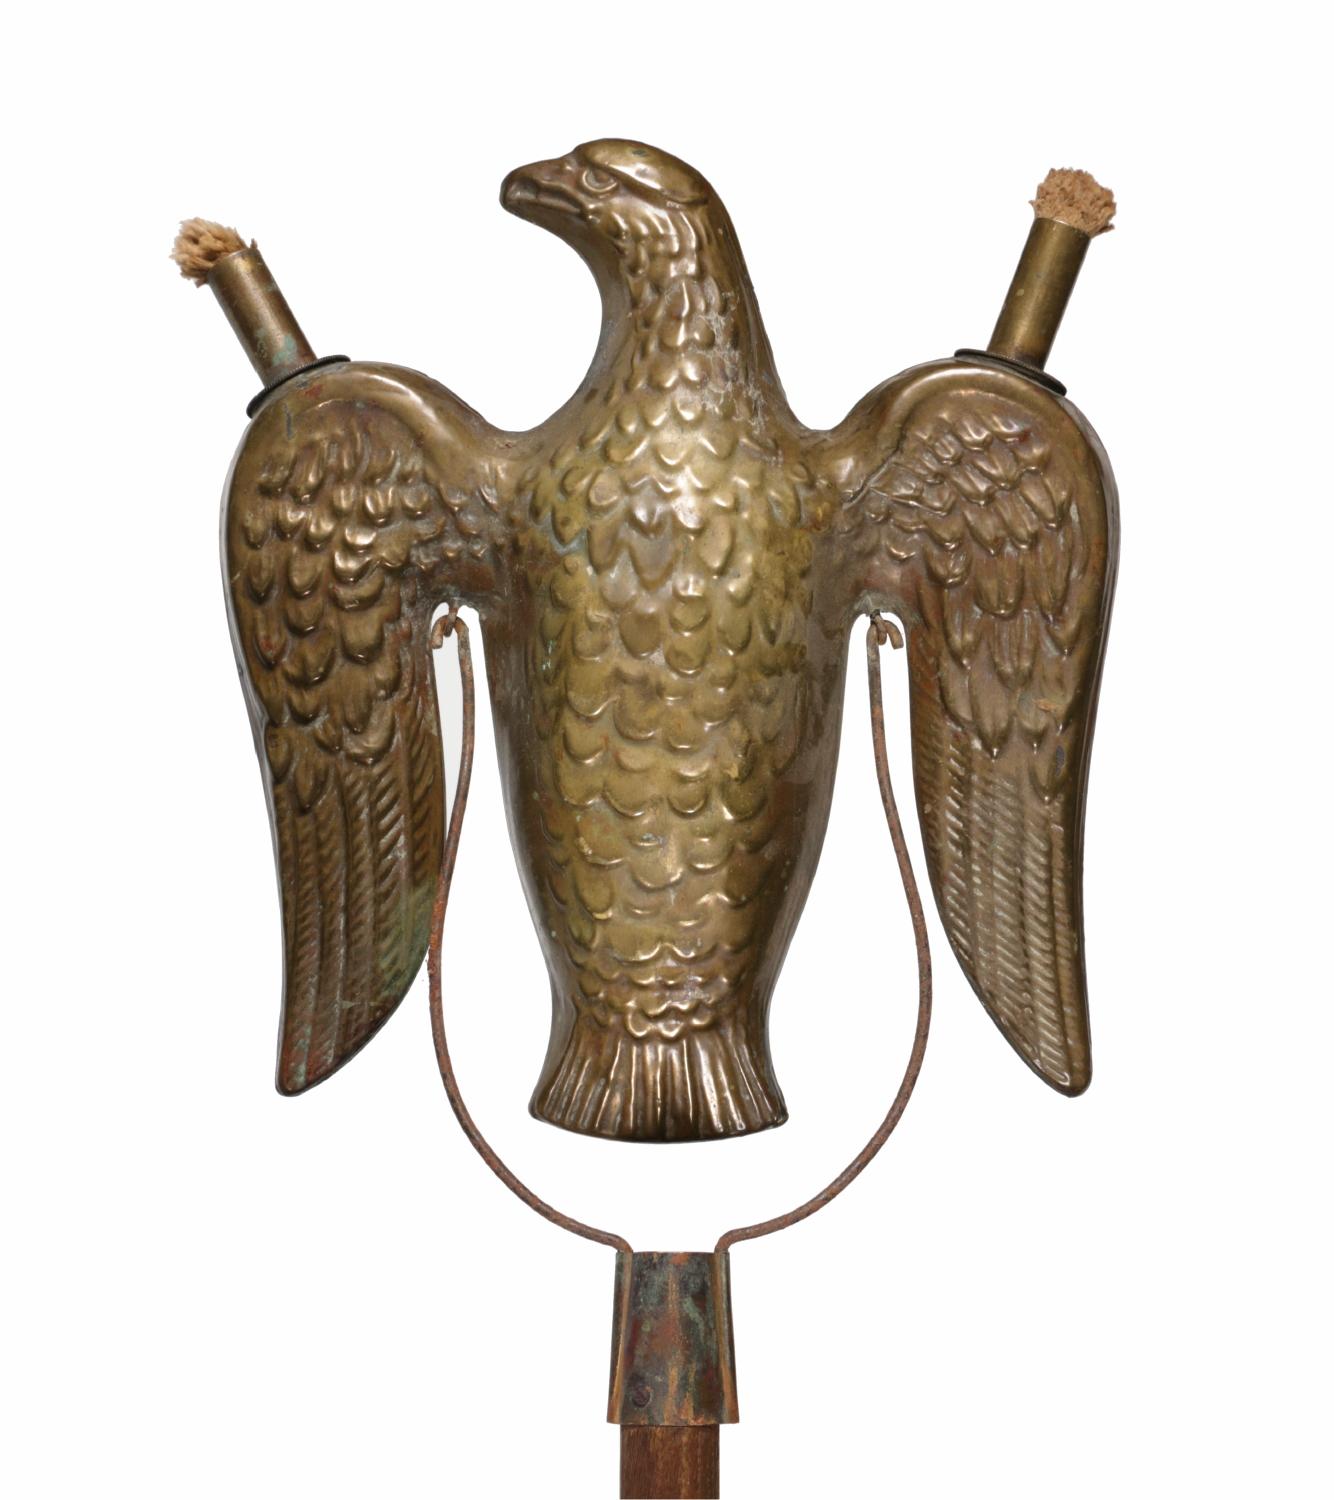 EAGLE FORM POLITICAL PARADE TORCH FROM THE 1860 or 1864 CAMPAIGN OF ABRAHAM LINCOLN 

Campaign parade torches were carried in nighttime processions when political candidates marched through cities giving speeches as they ran for public office. They